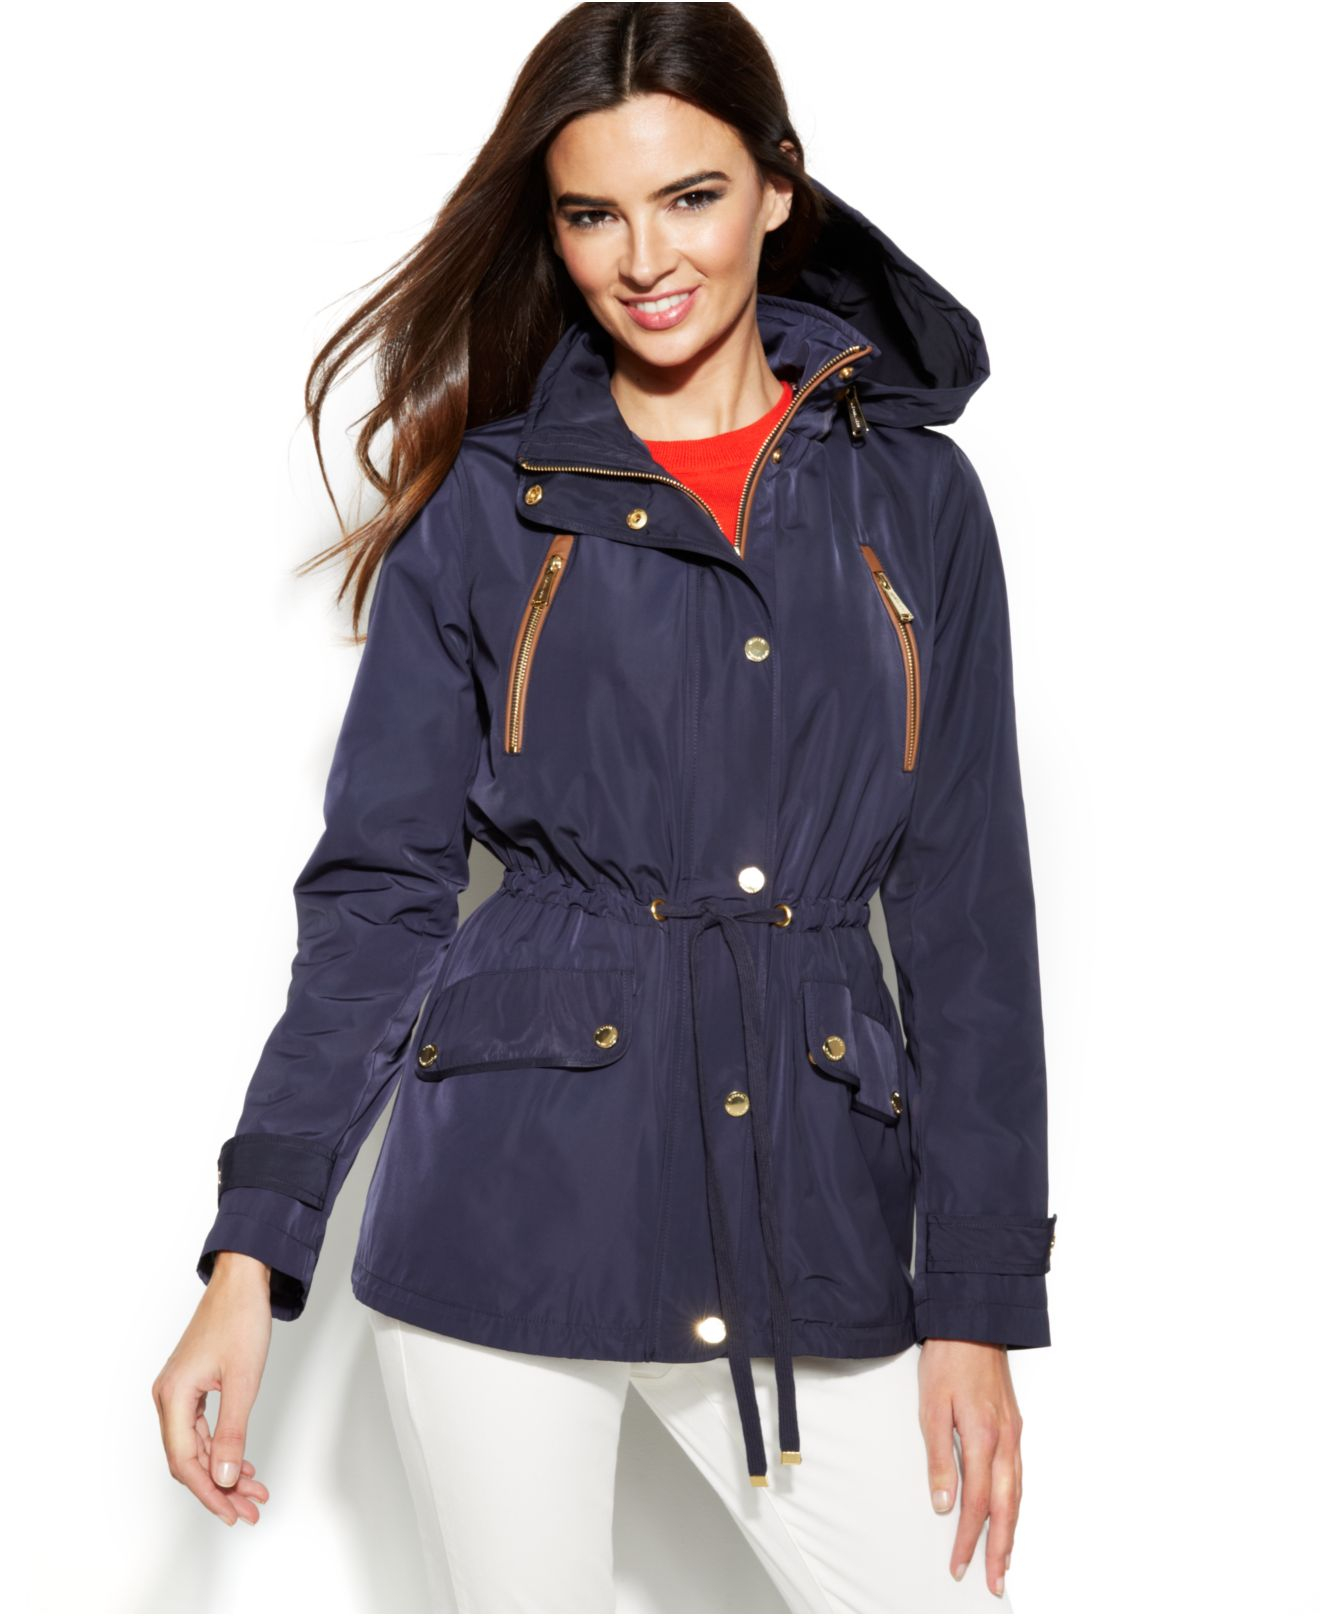 Lyst - Michael Kors Michael Faux-Leather-Trim Hooded Anorak Jacket in Blue